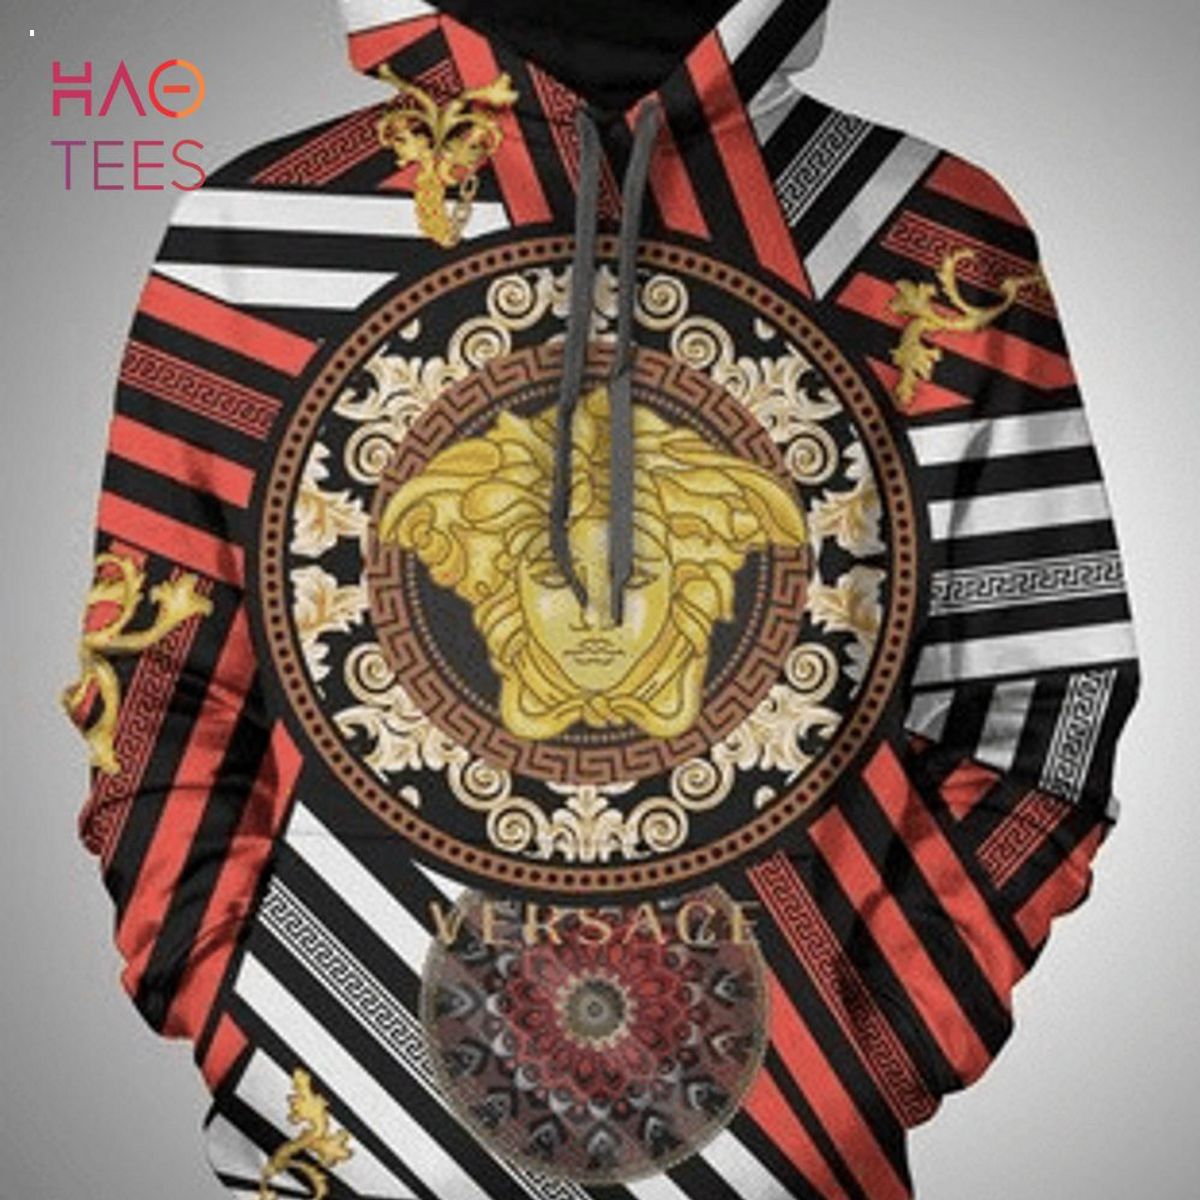 NEW Versace Luxury French Fashion Hoodie Pants Limited Edition